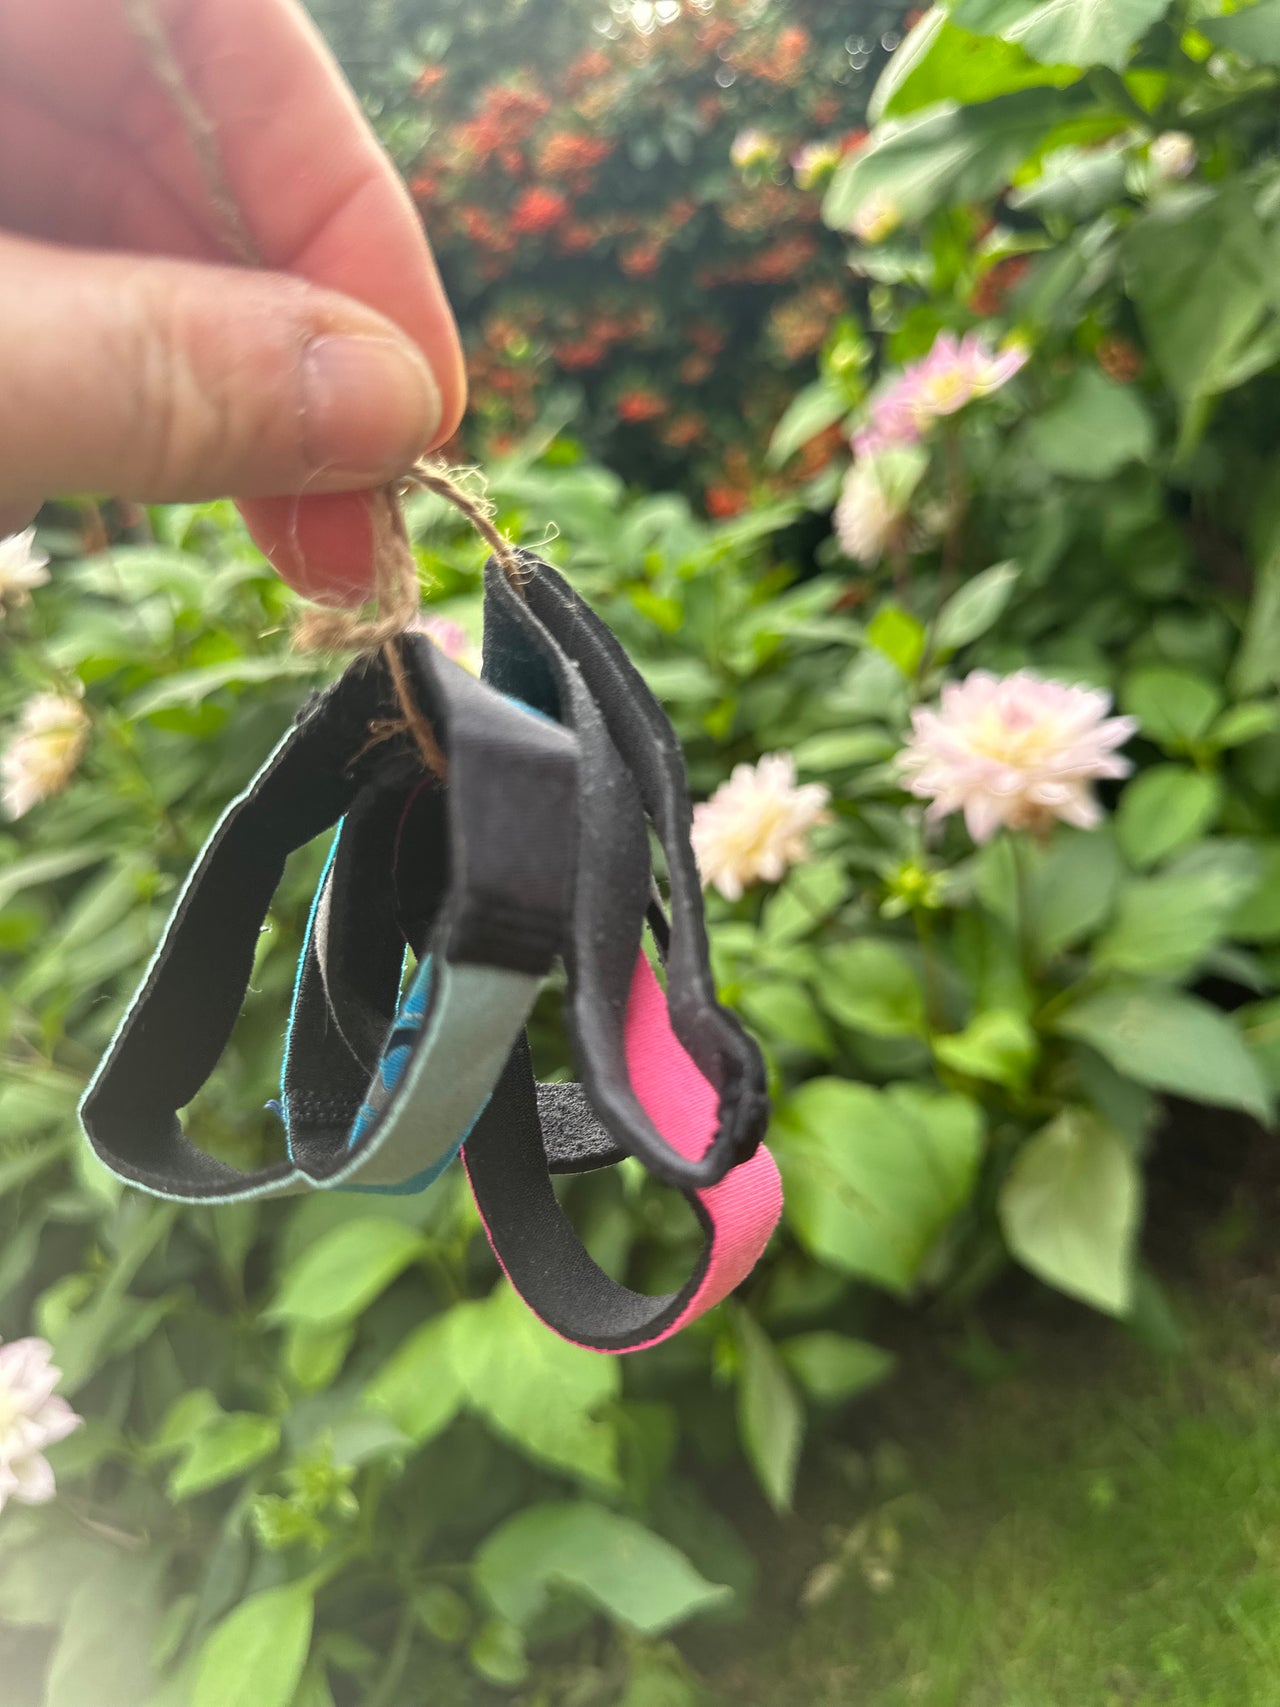 I used to be a broken wetsuit - Pack of 5 Assorted Hairbands